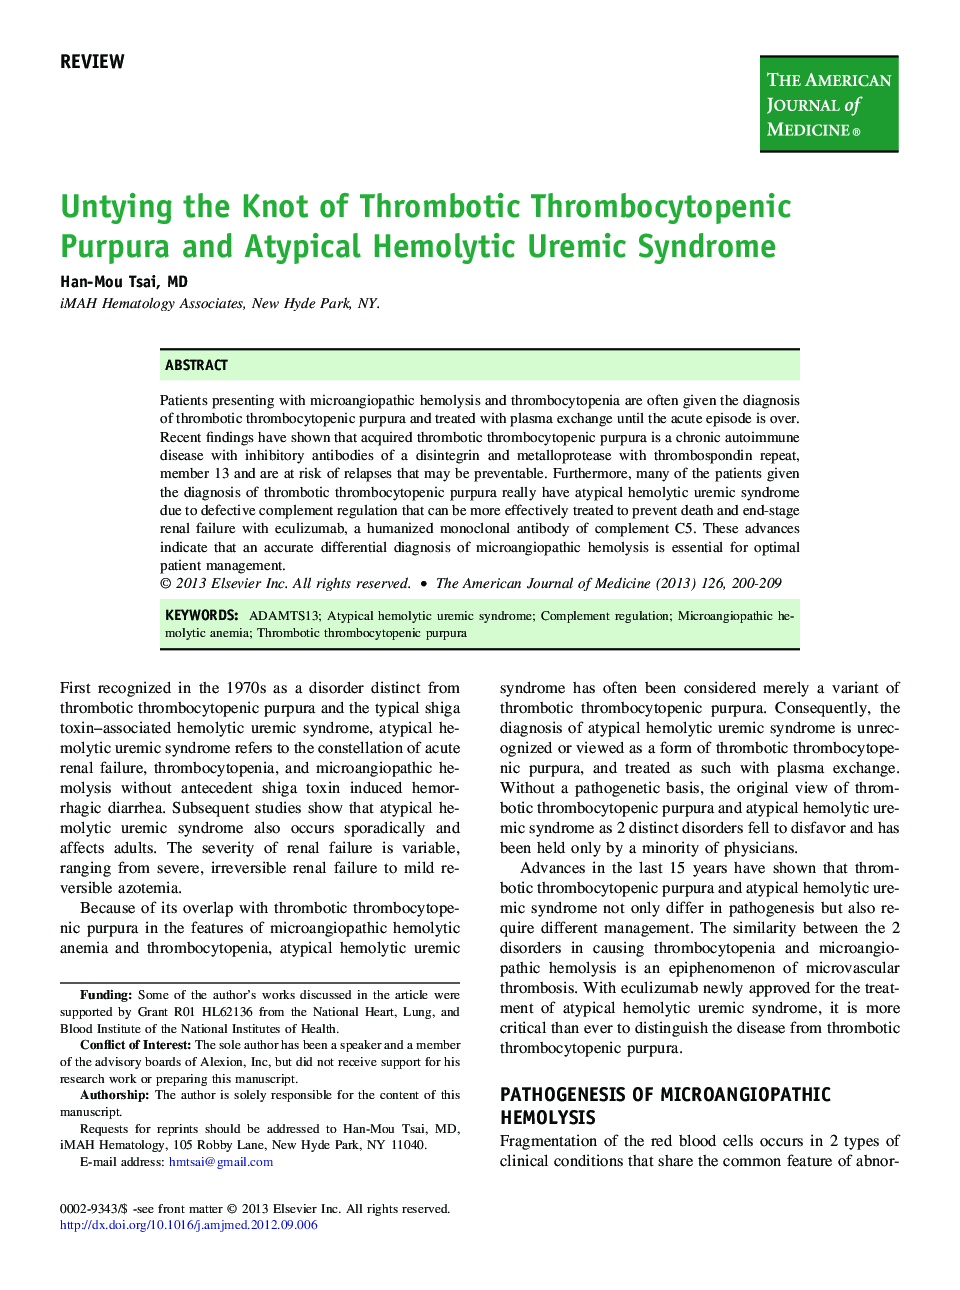 Untying the Knot of Thrombotic Thrombocytopenic Purpura and Atypical Hemolytic Uremic Syndrome 